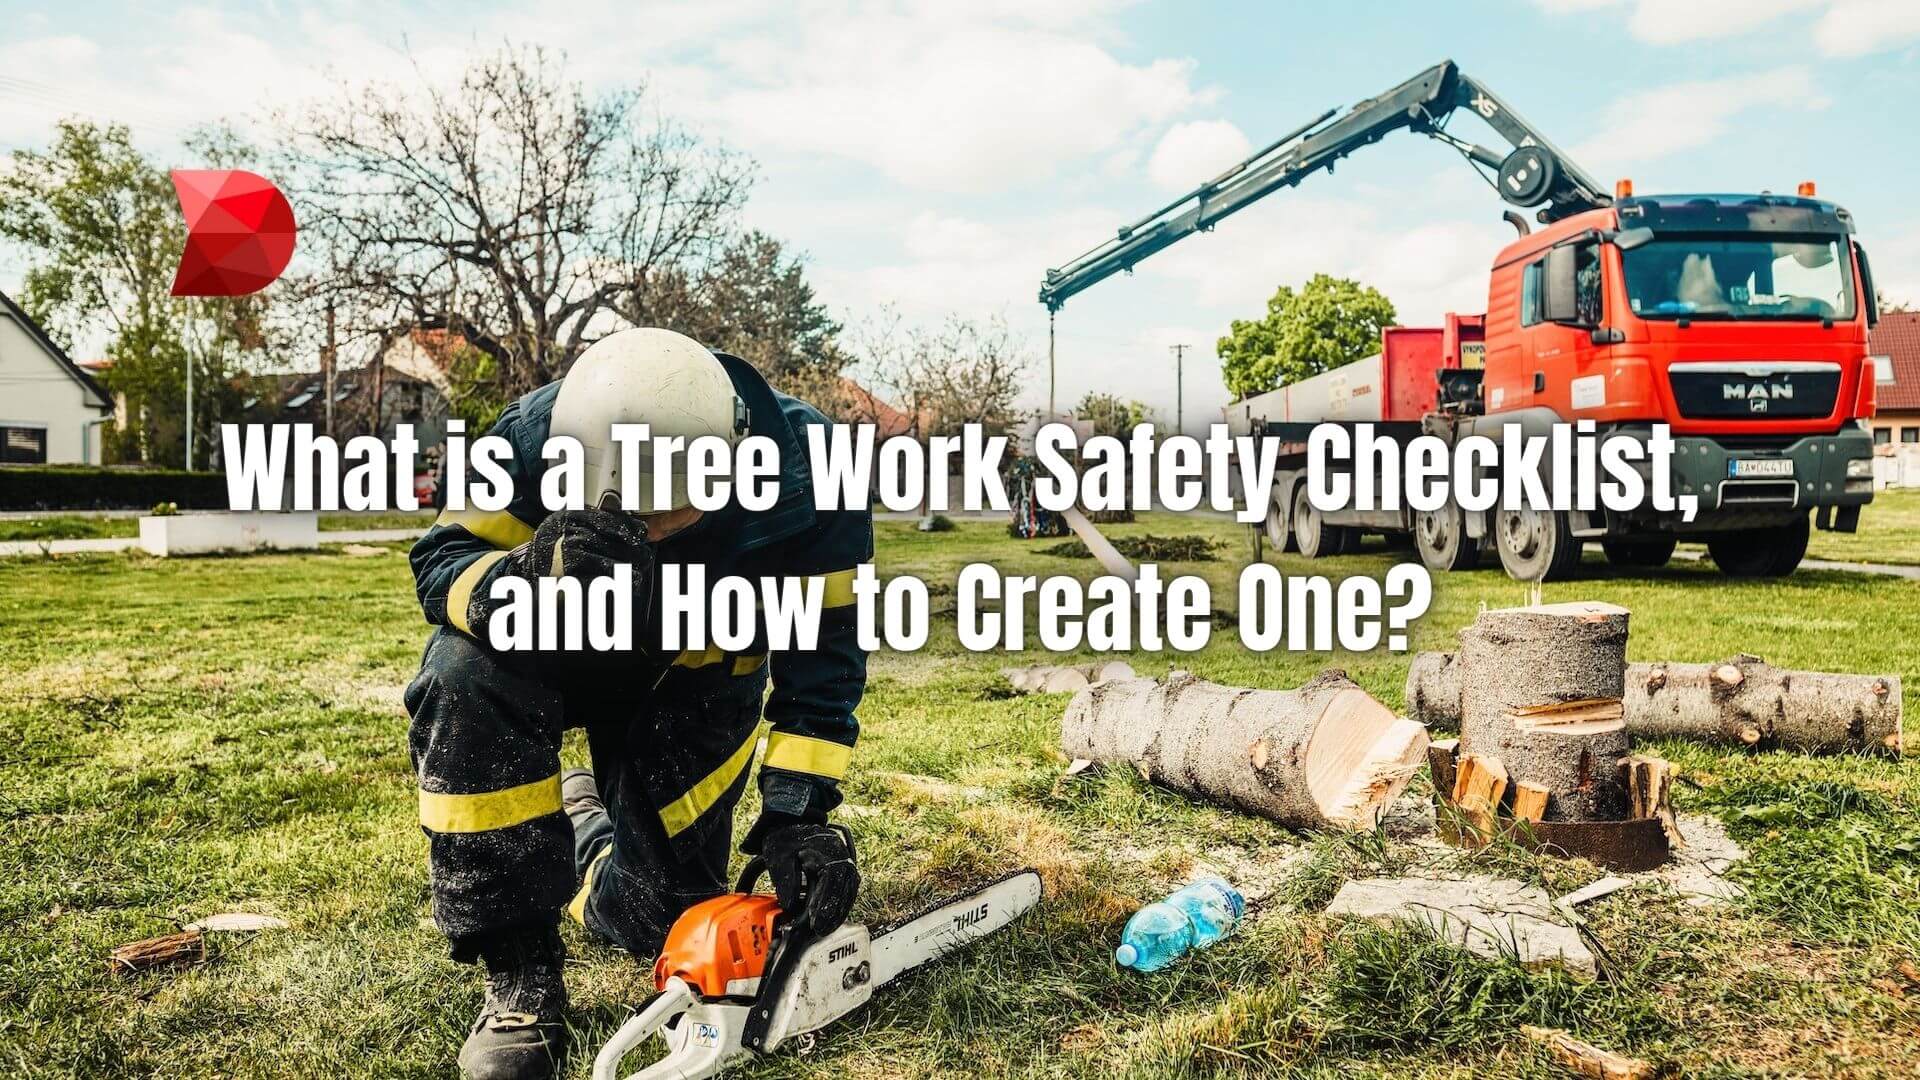 Creating a Tree Work Safety Checklist helps ensure the safety and productivity of arborists and tree care professionals. Learn how!